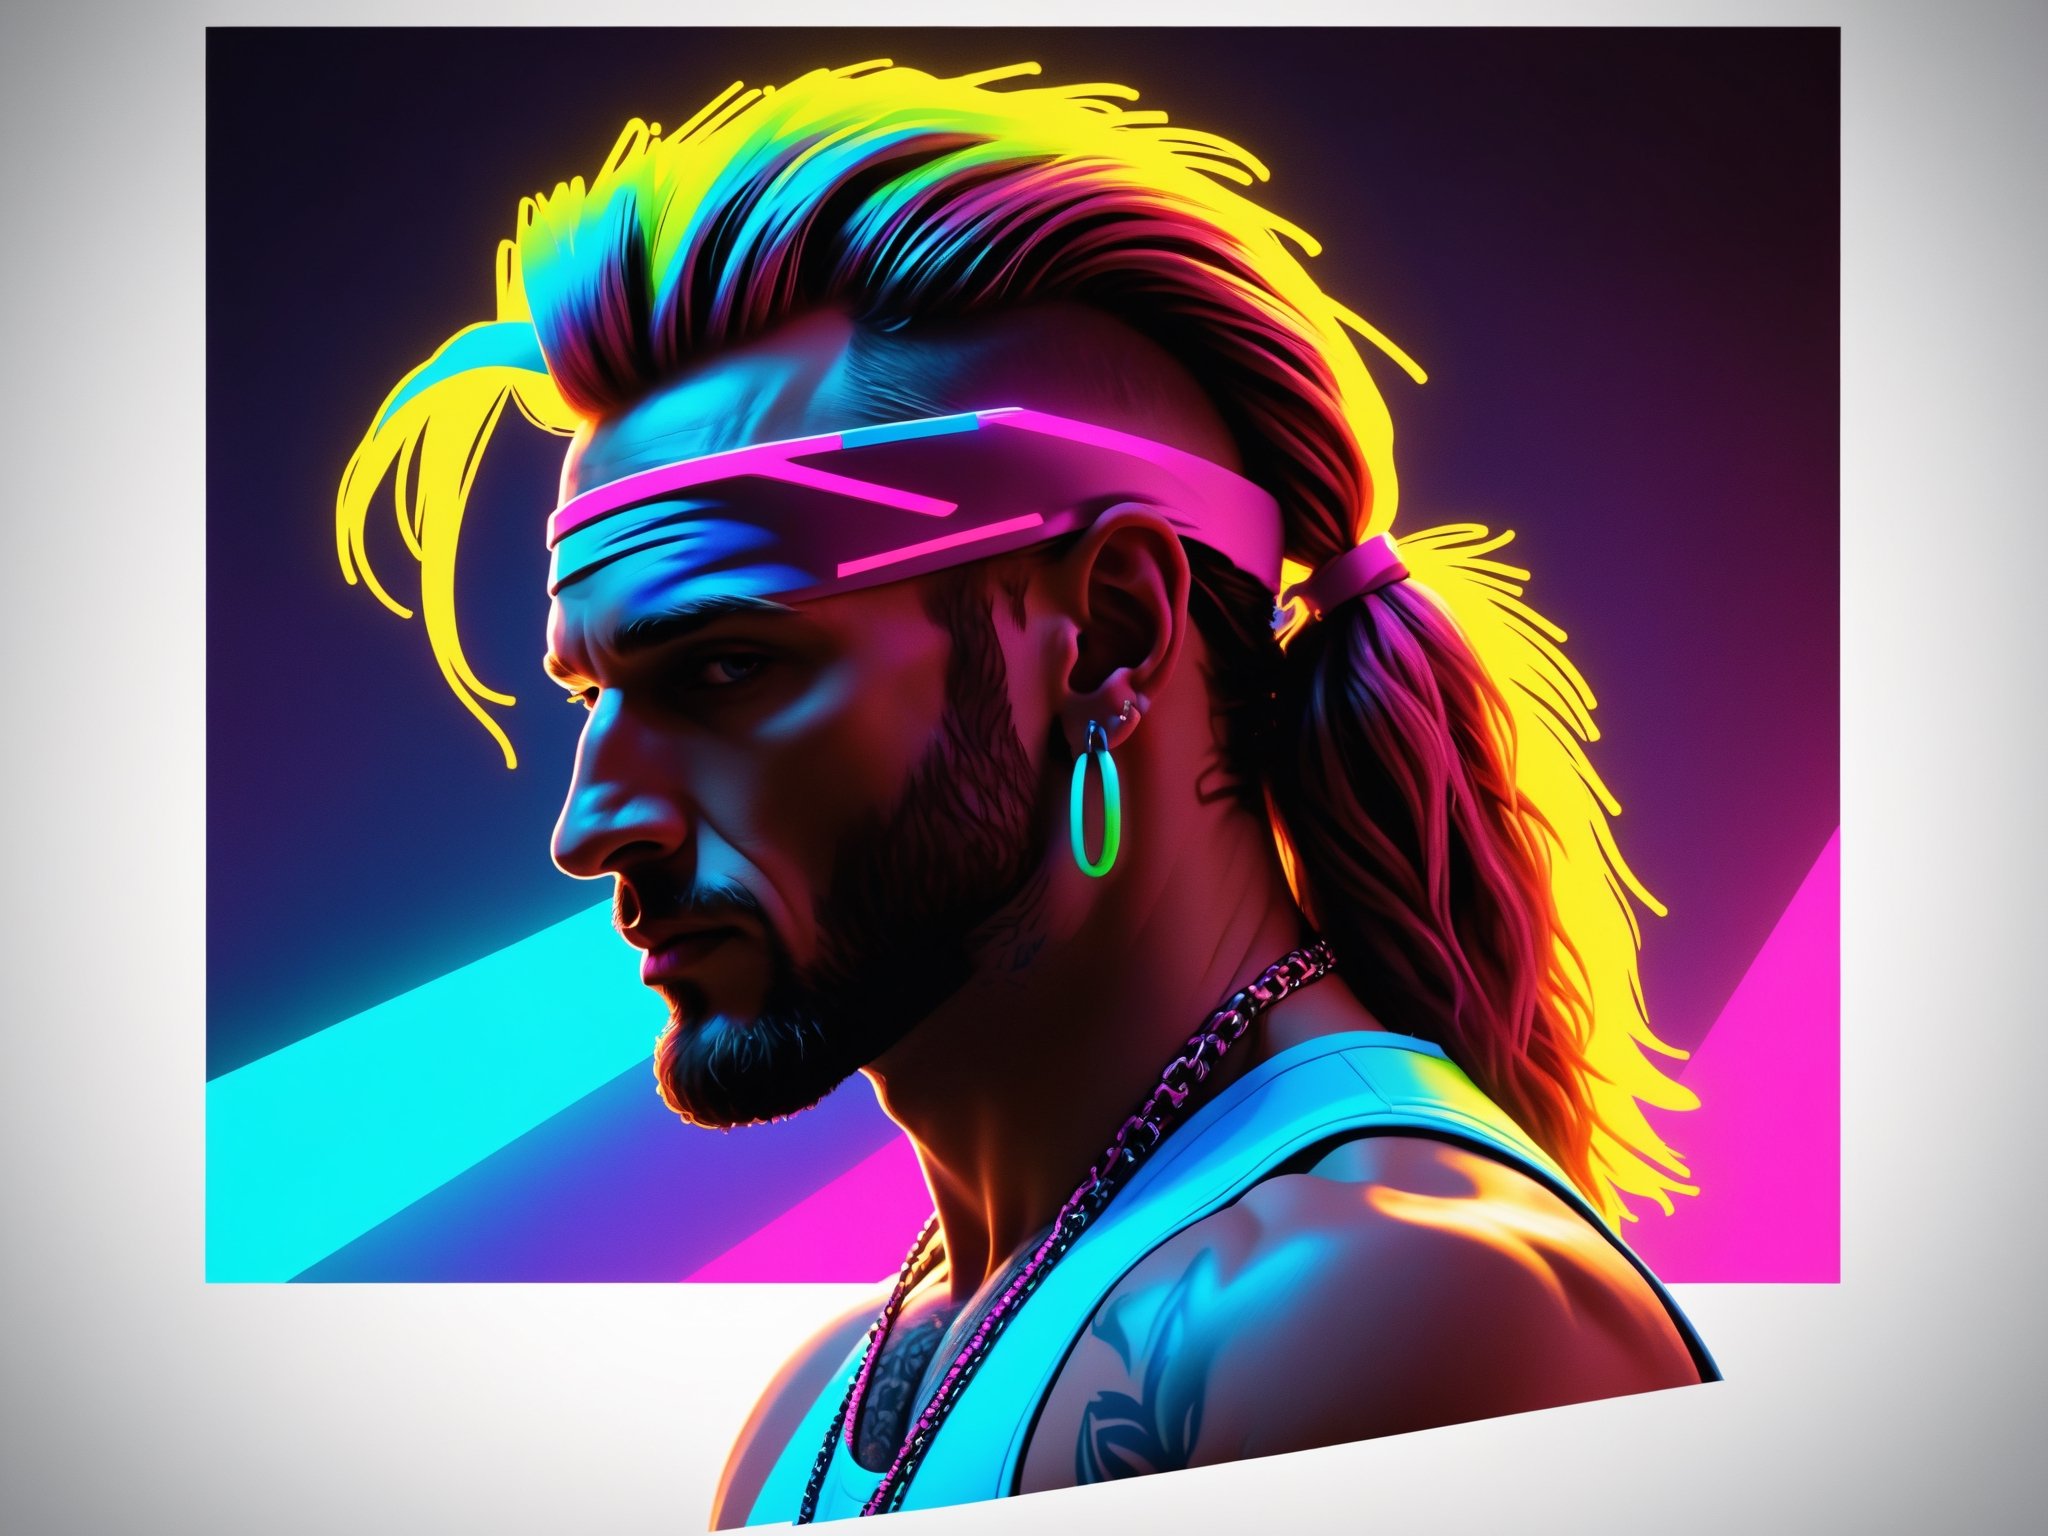 Riff raff, neon icon, 80s workout video, silhouette of the pinnacle, 
score_9, score_8_up, score_7_up, TOONaughty style, real_booster,art_booster,  skp, detail master, decy realism 